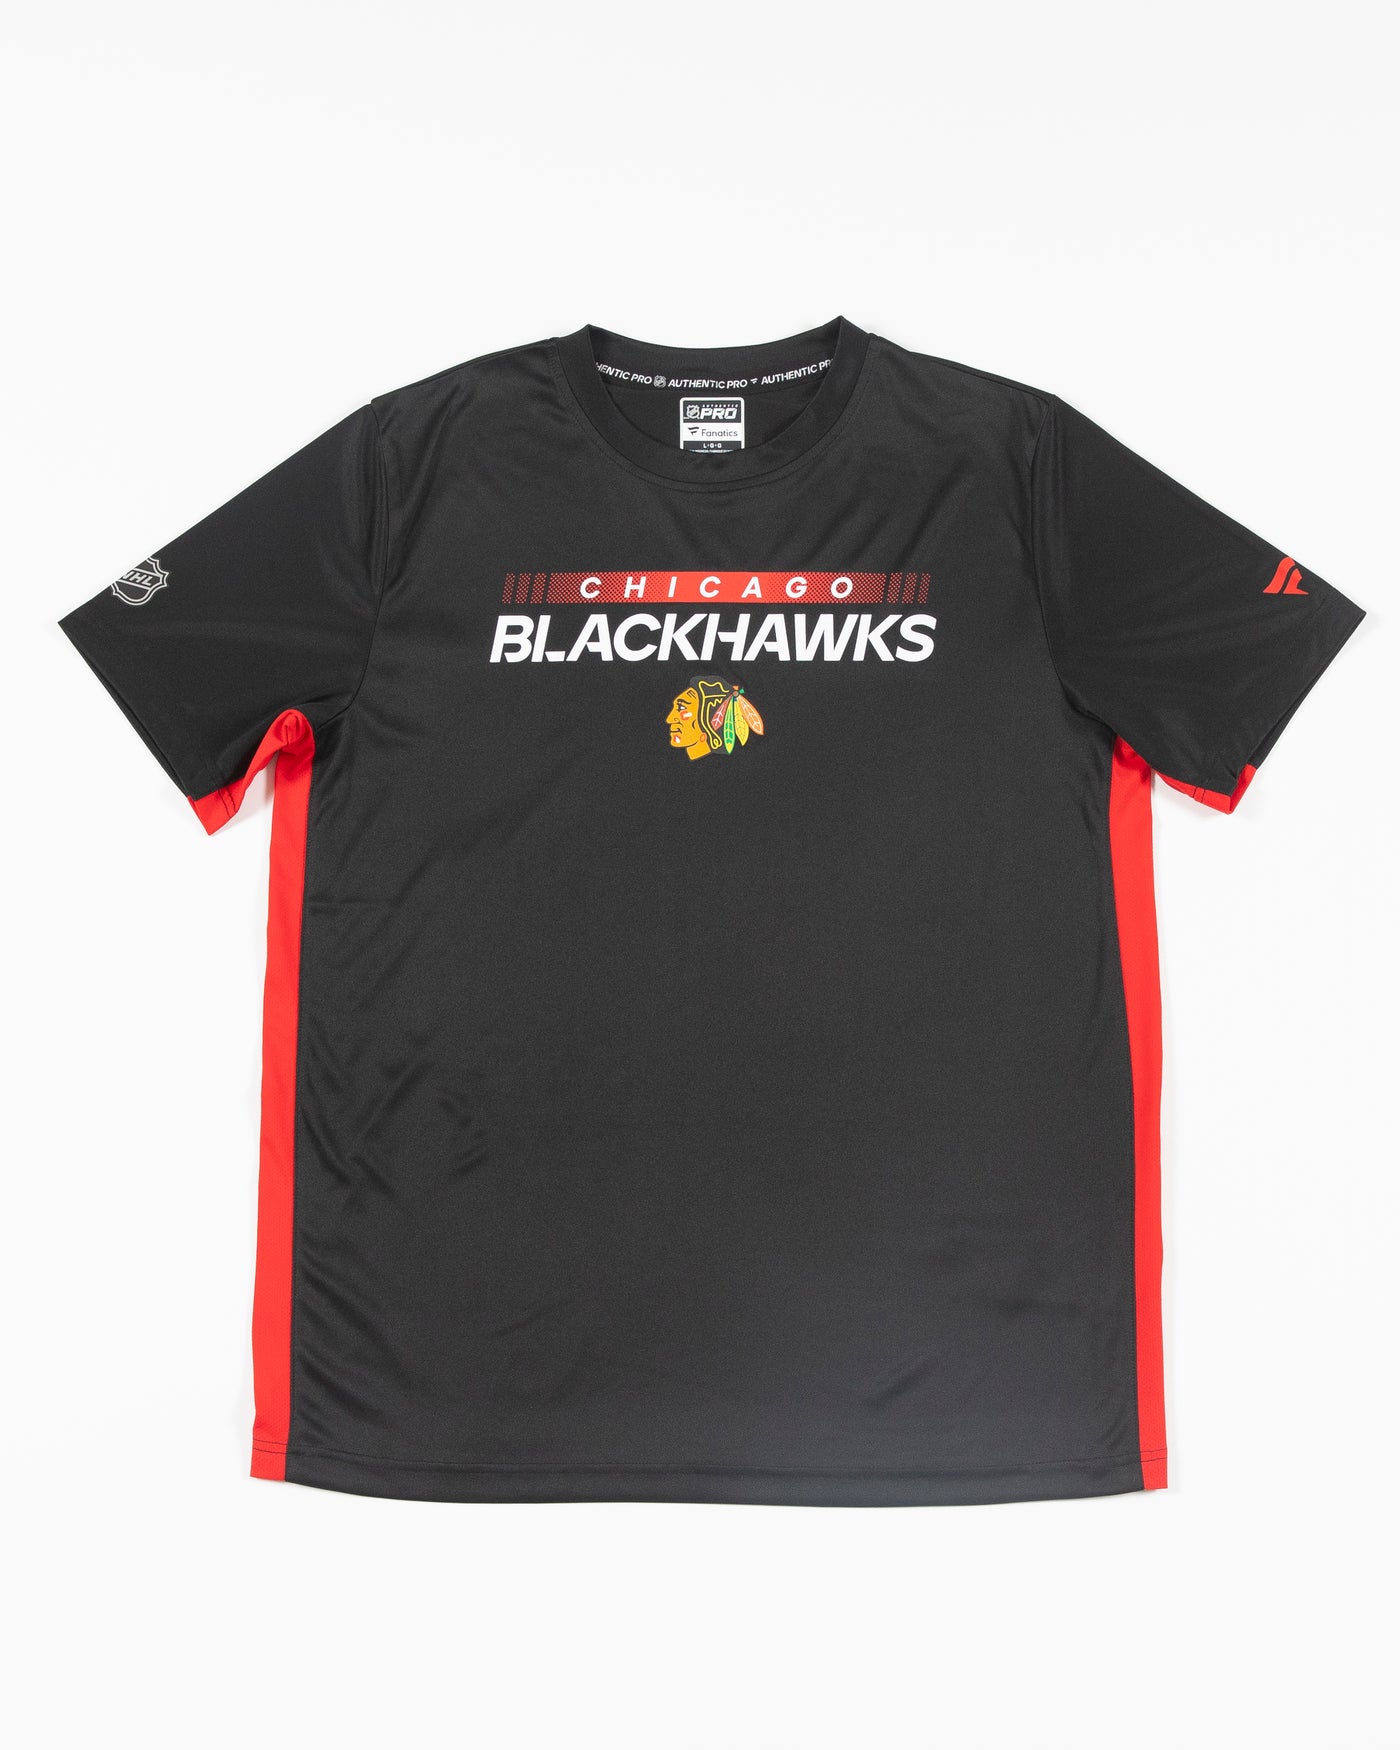 Fanatics Authentic Pro black t-shirt with Chicago Blackhawks wordmark and primary logo graphic across chest - front lay flat